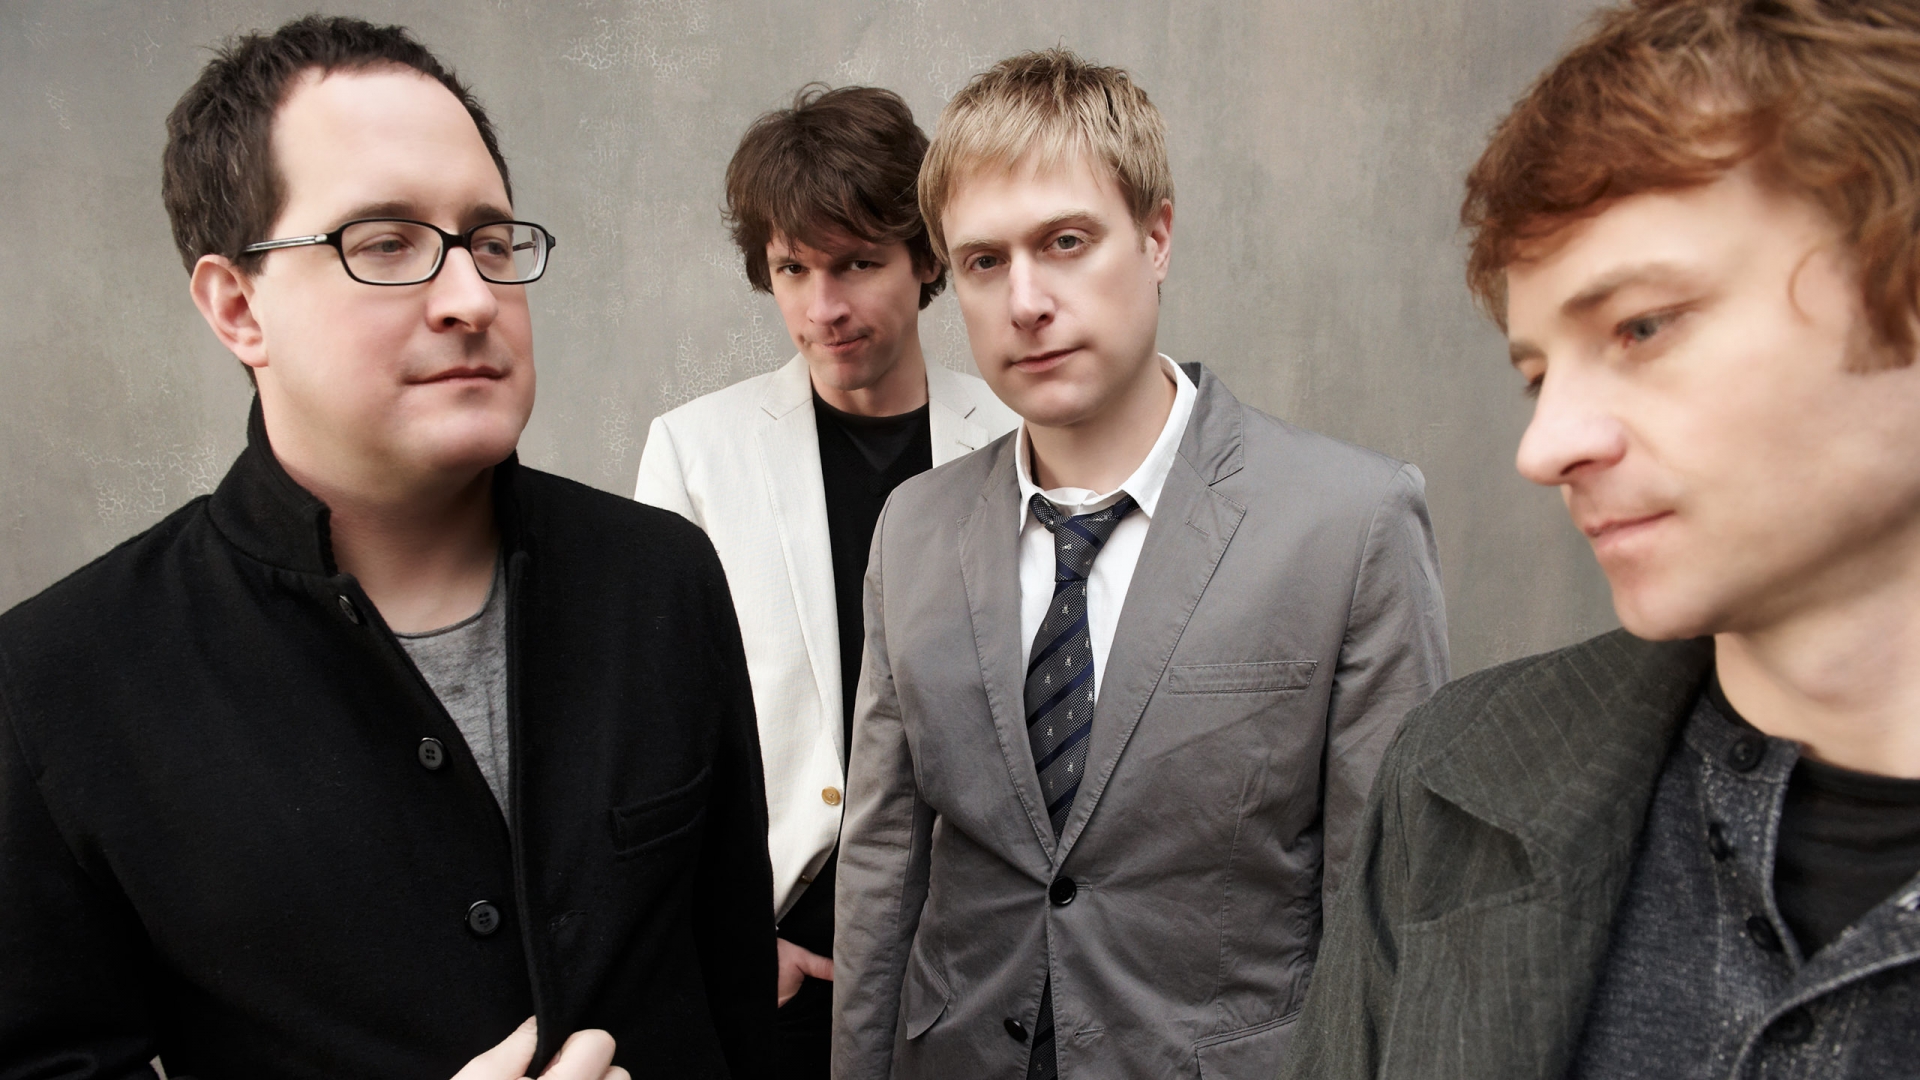 The Hold Steady for 1920 x 1080 HDTV 1080p resolution